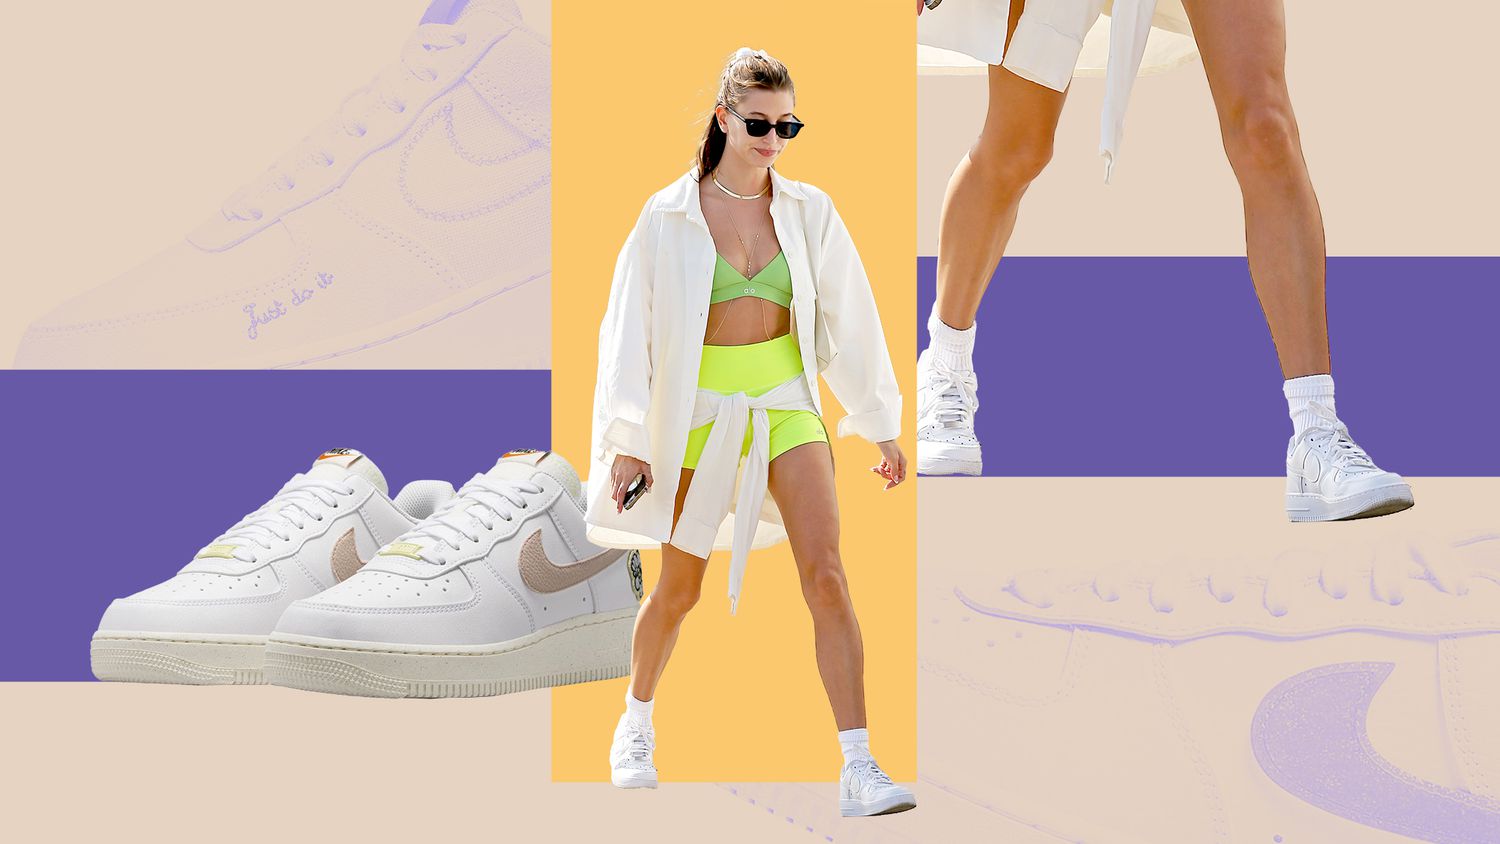 Hailey Bieber Walking surrounded by Air Force 1 shoes inside rectangles